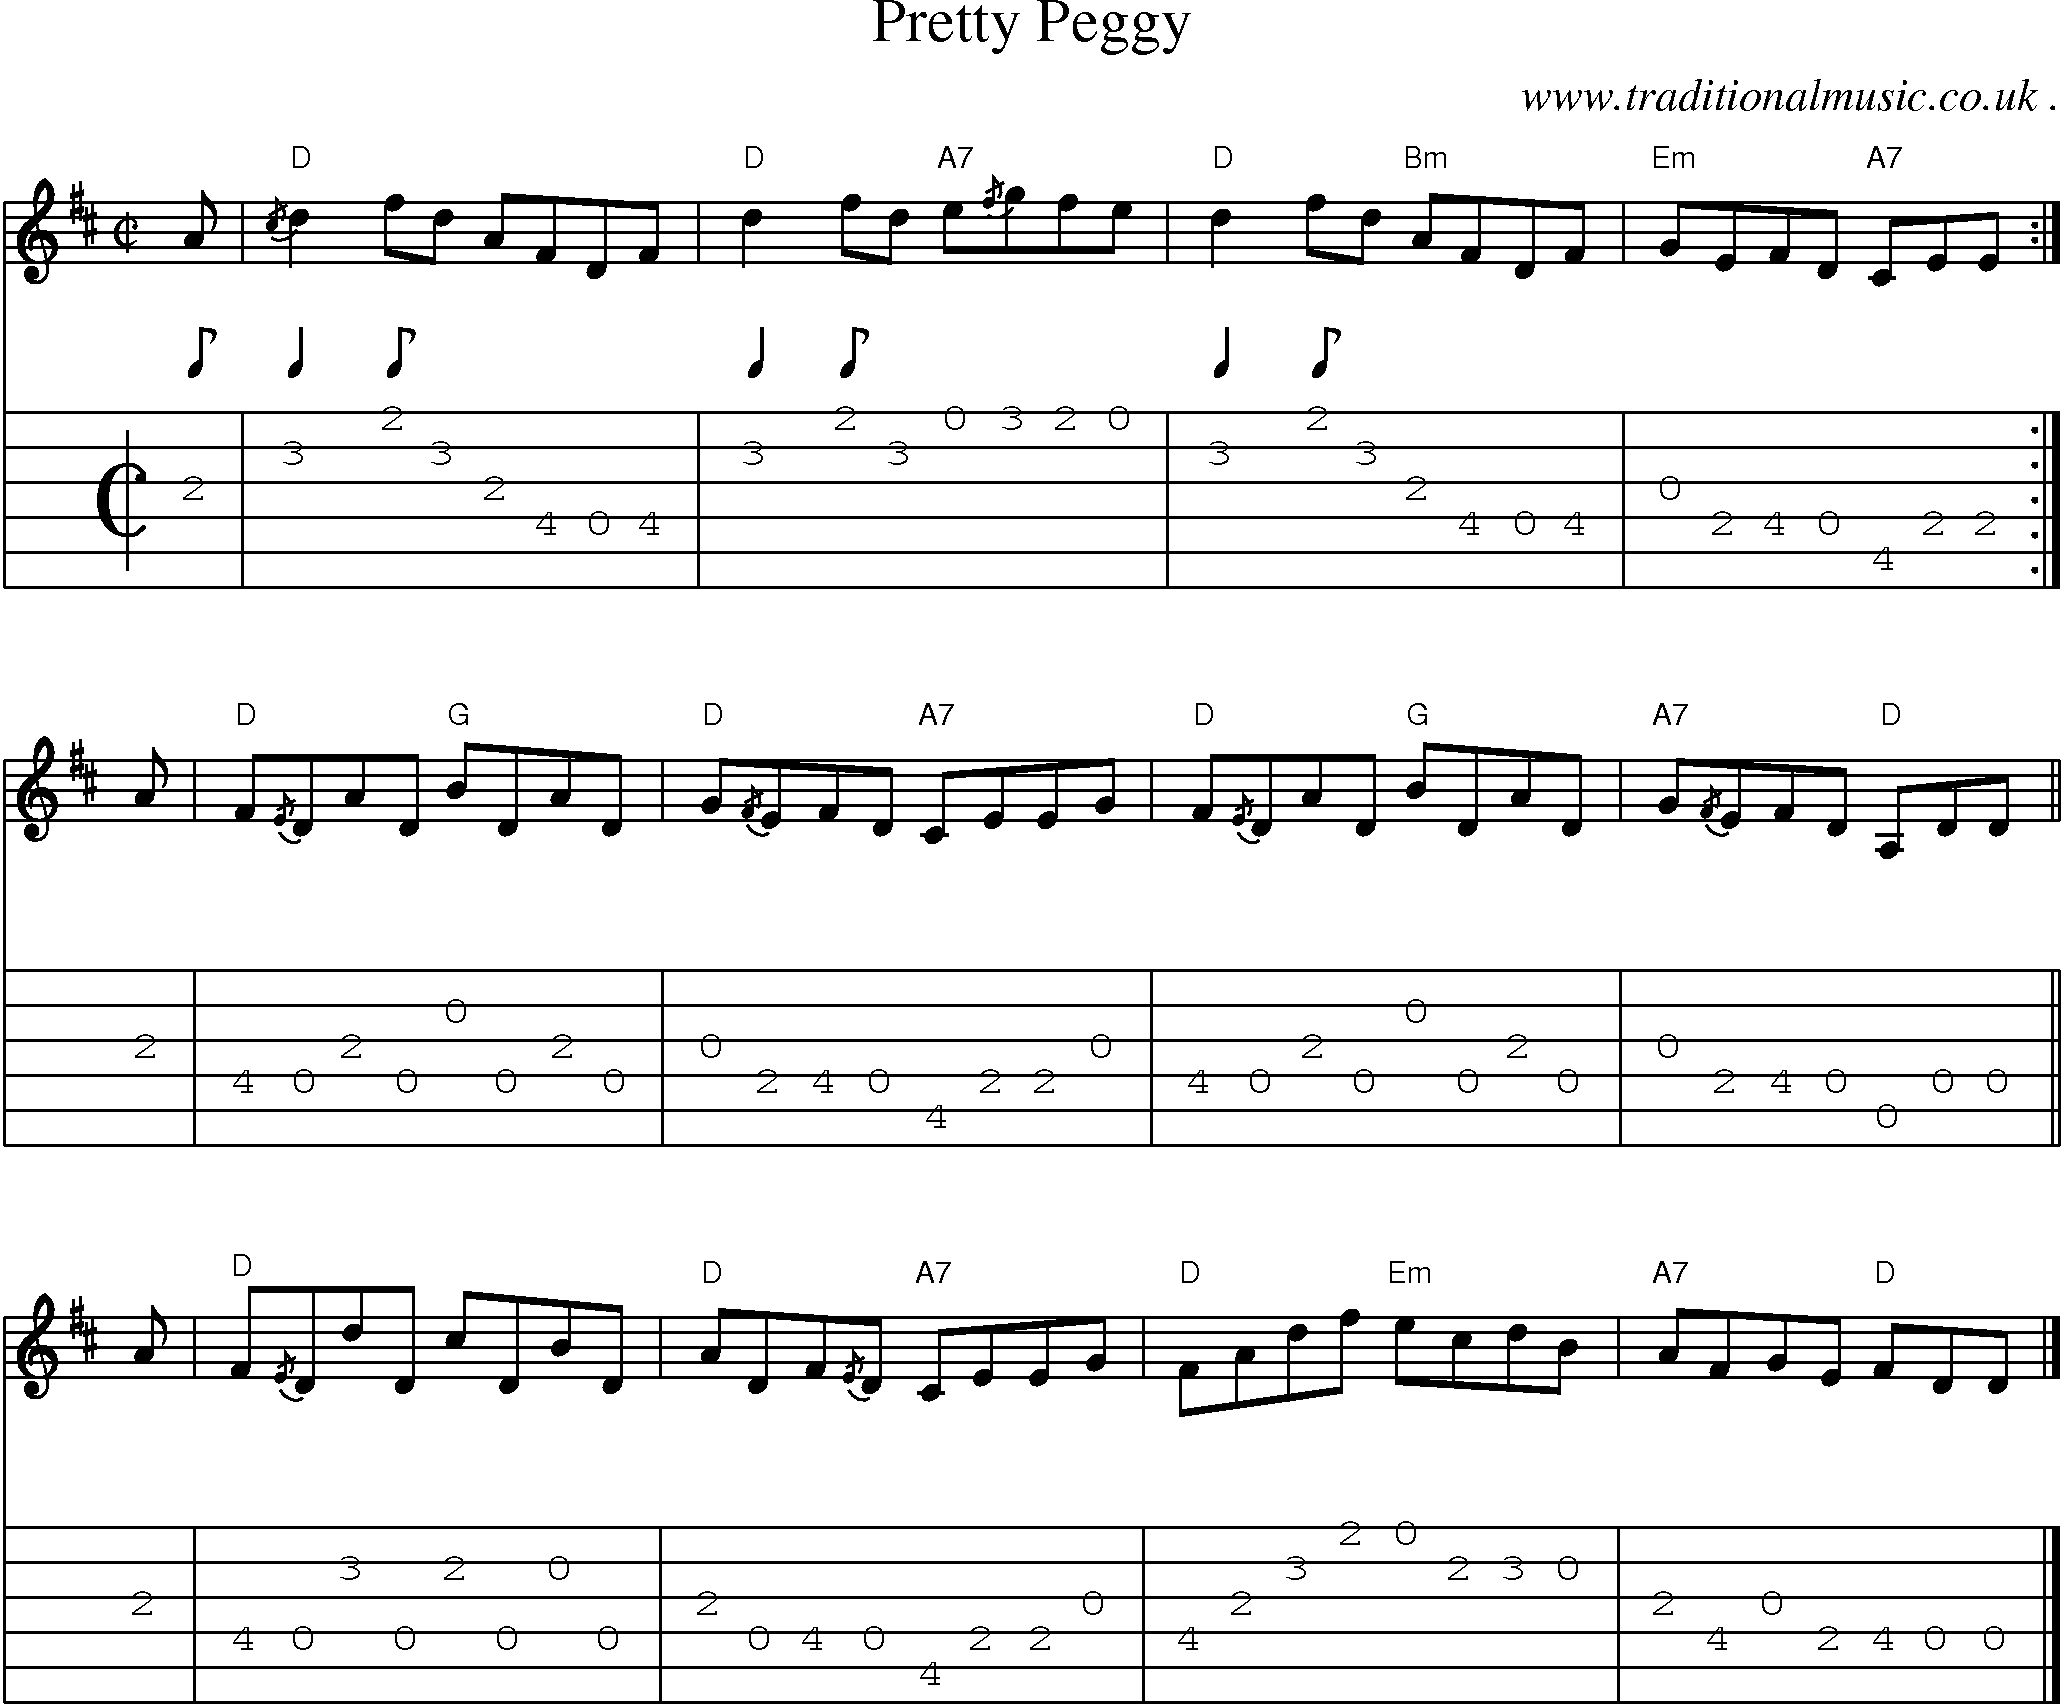 Sheet-music  score, Chords and Guitar Tabs for Pretty Peggy